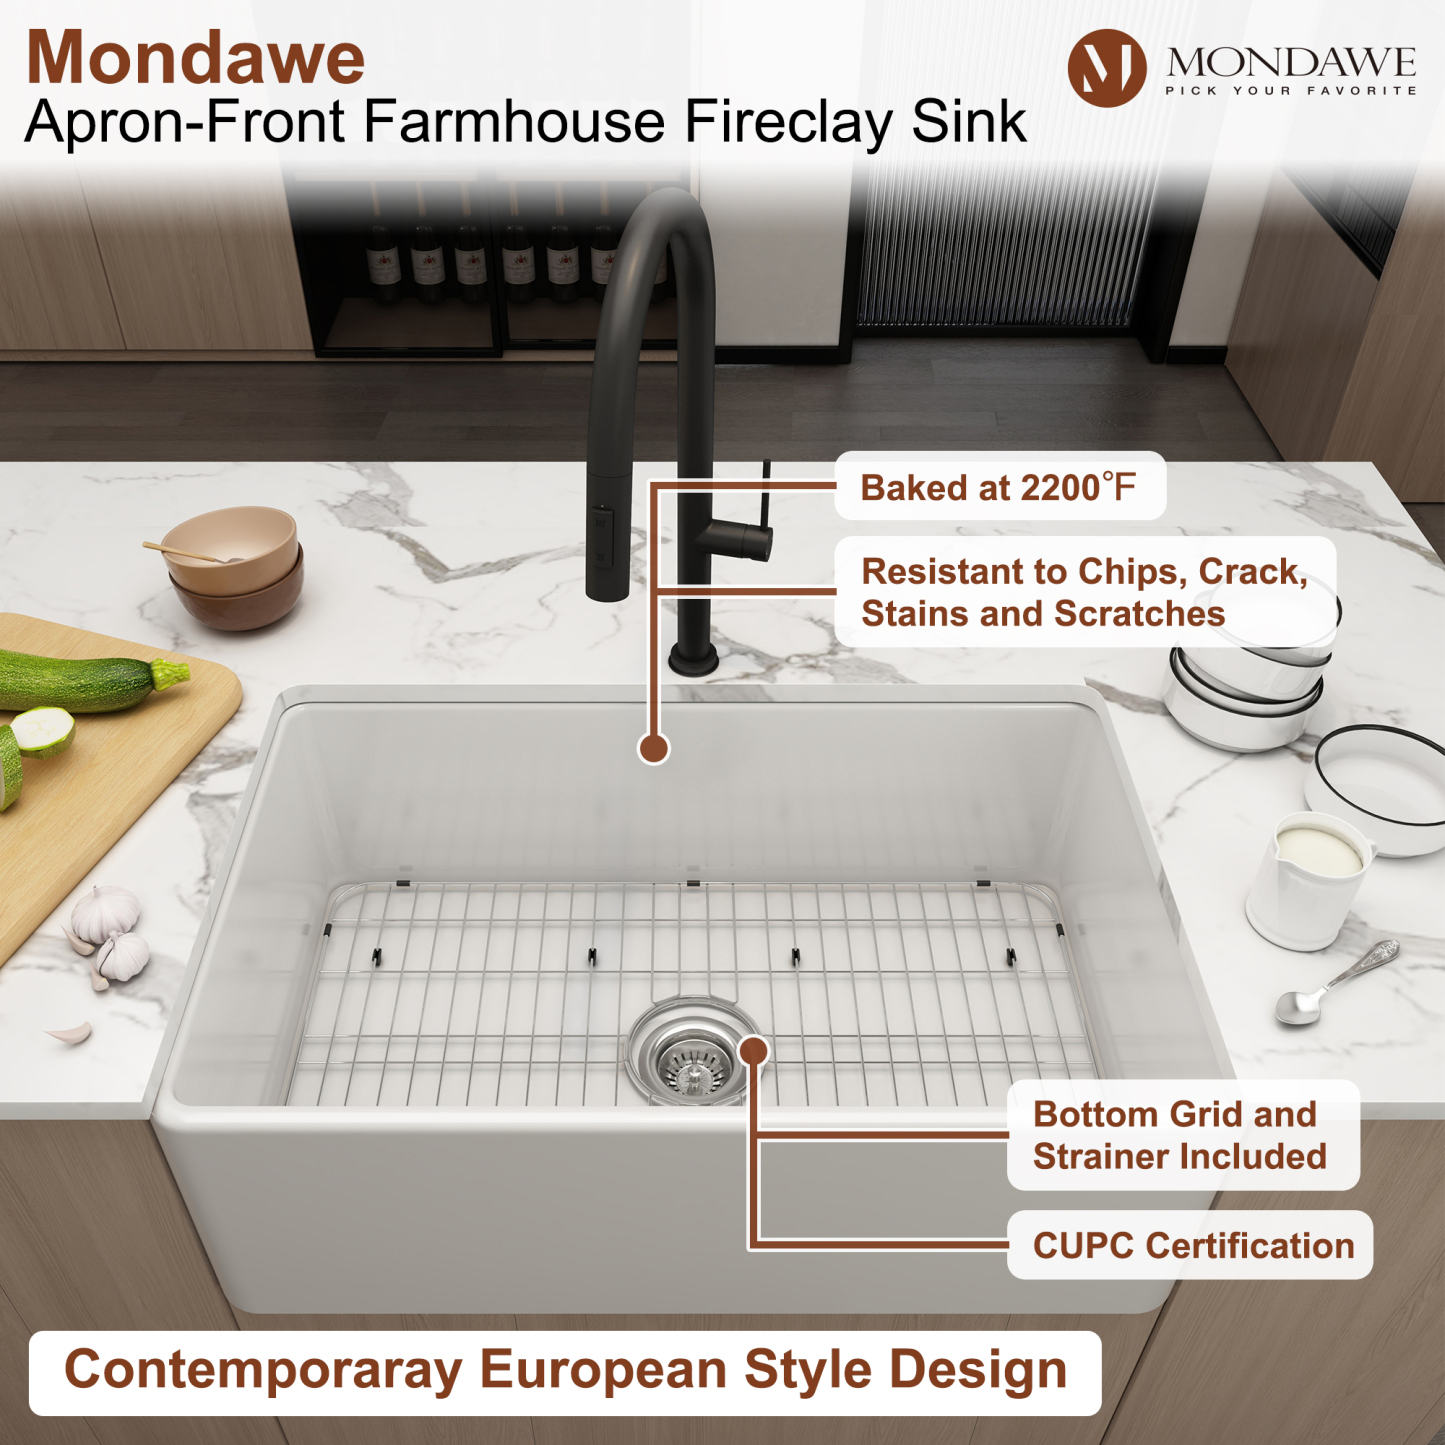 Farmhouse 30 in. single bowl fireclay kitchen sink in white comes with pull-down faucet-Mondawe